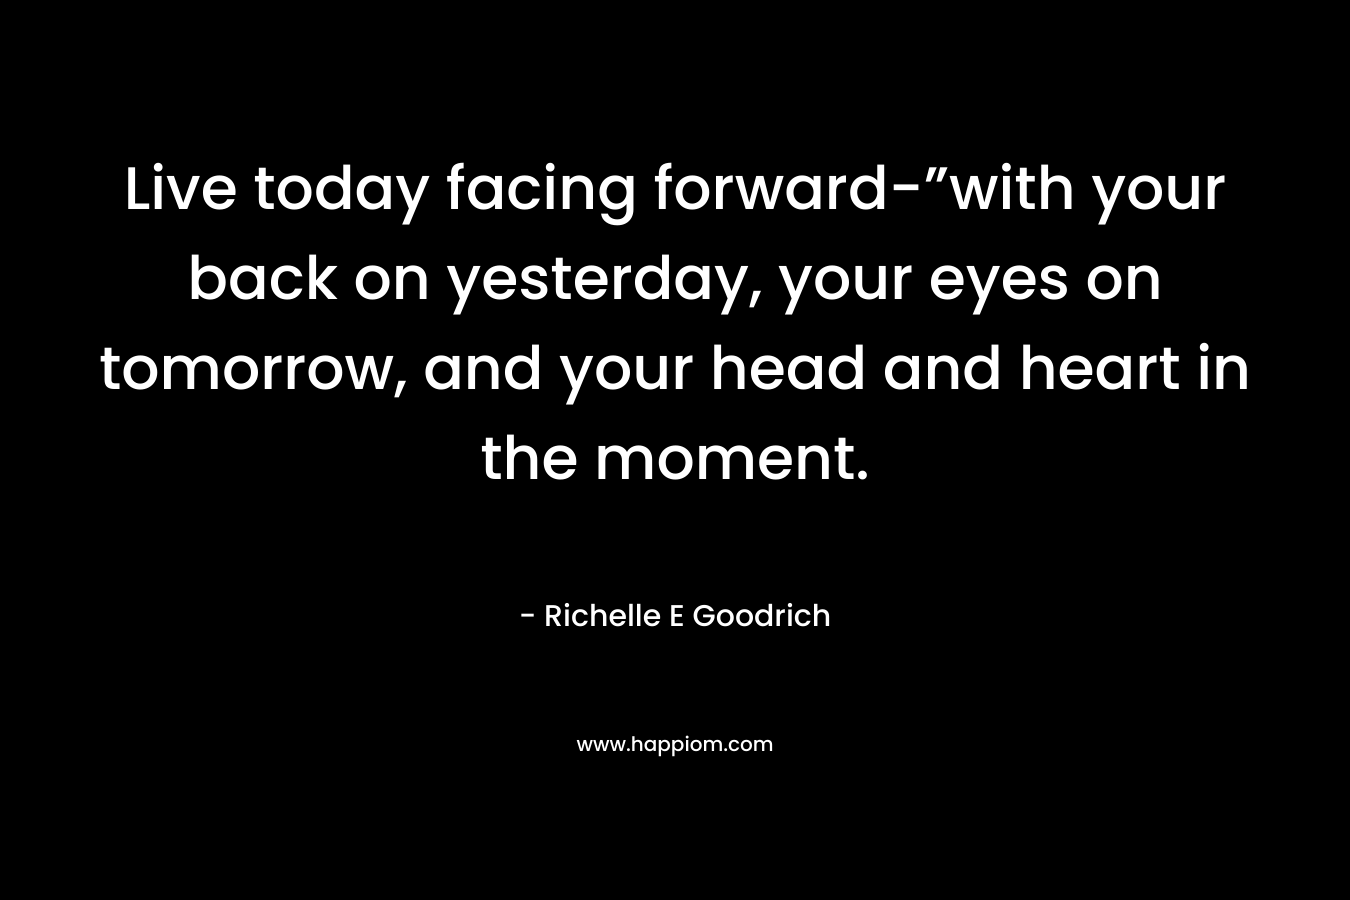 Live today facing forward-”with your back on yesterday, your eyes on tomorrow, and your head and heart in the moment.